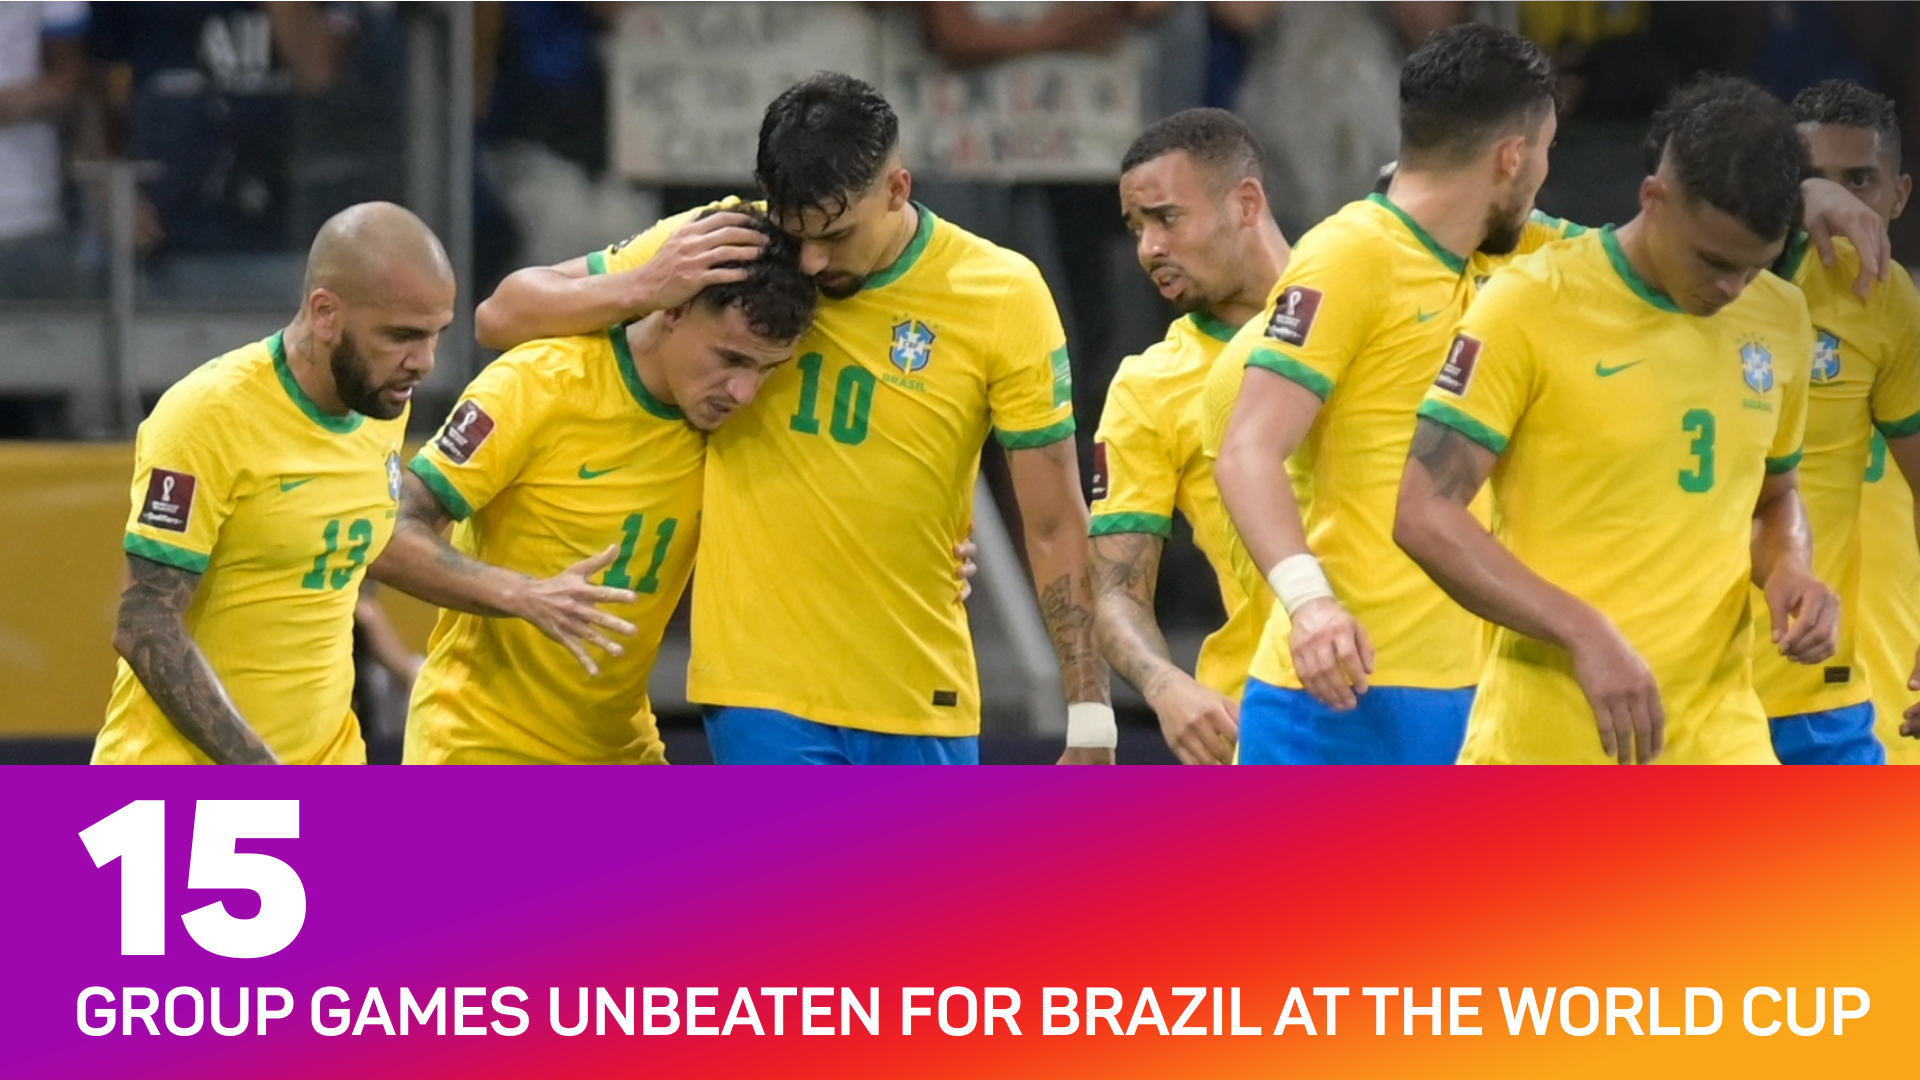 Brazil are unbeaten in 15 group matches at the World Cup